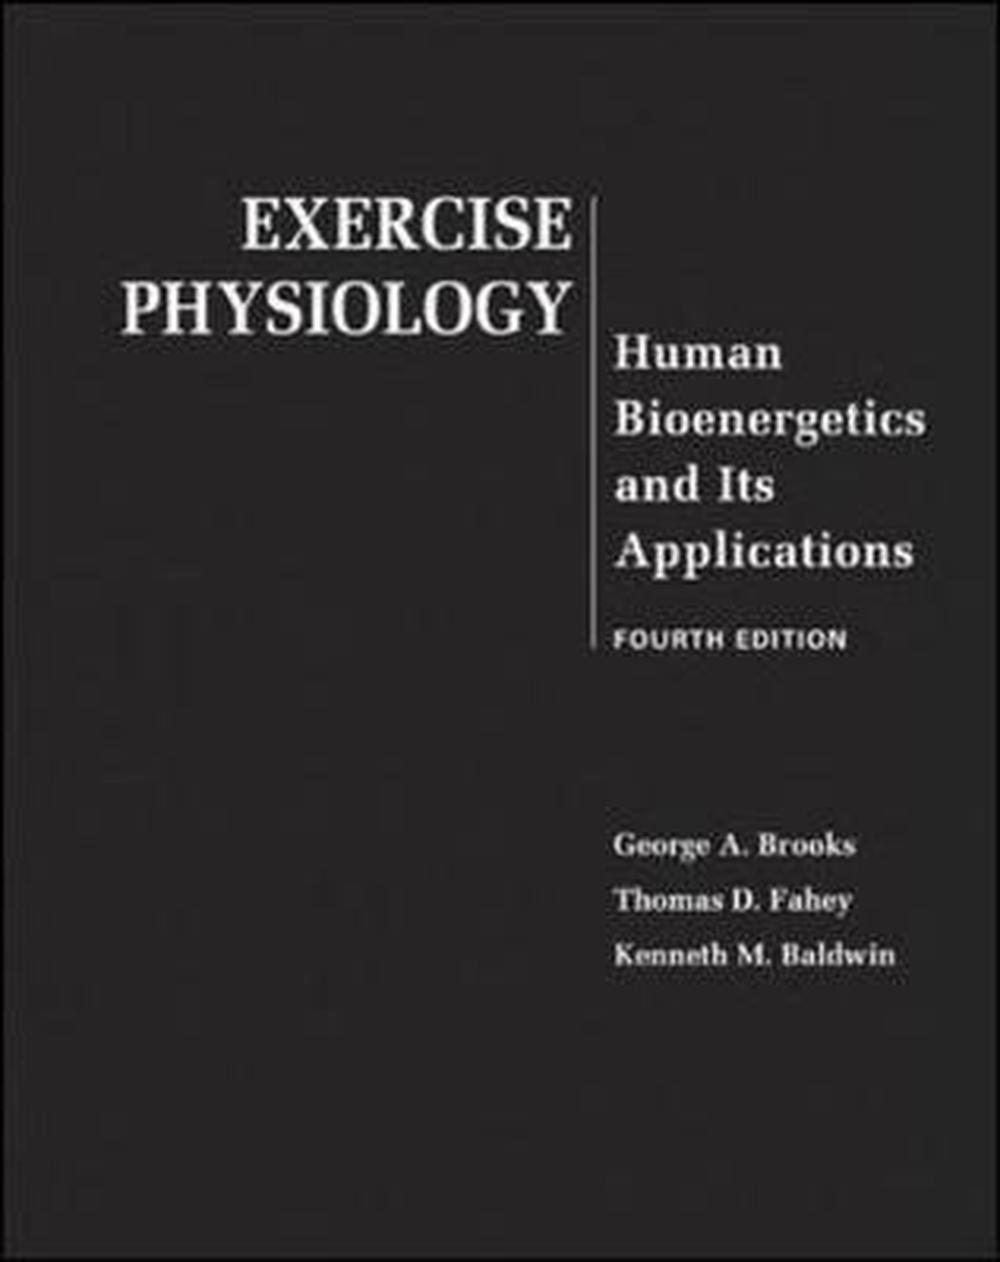 Exercise Physiology Human Bioenergetics and Its Applications, 4th